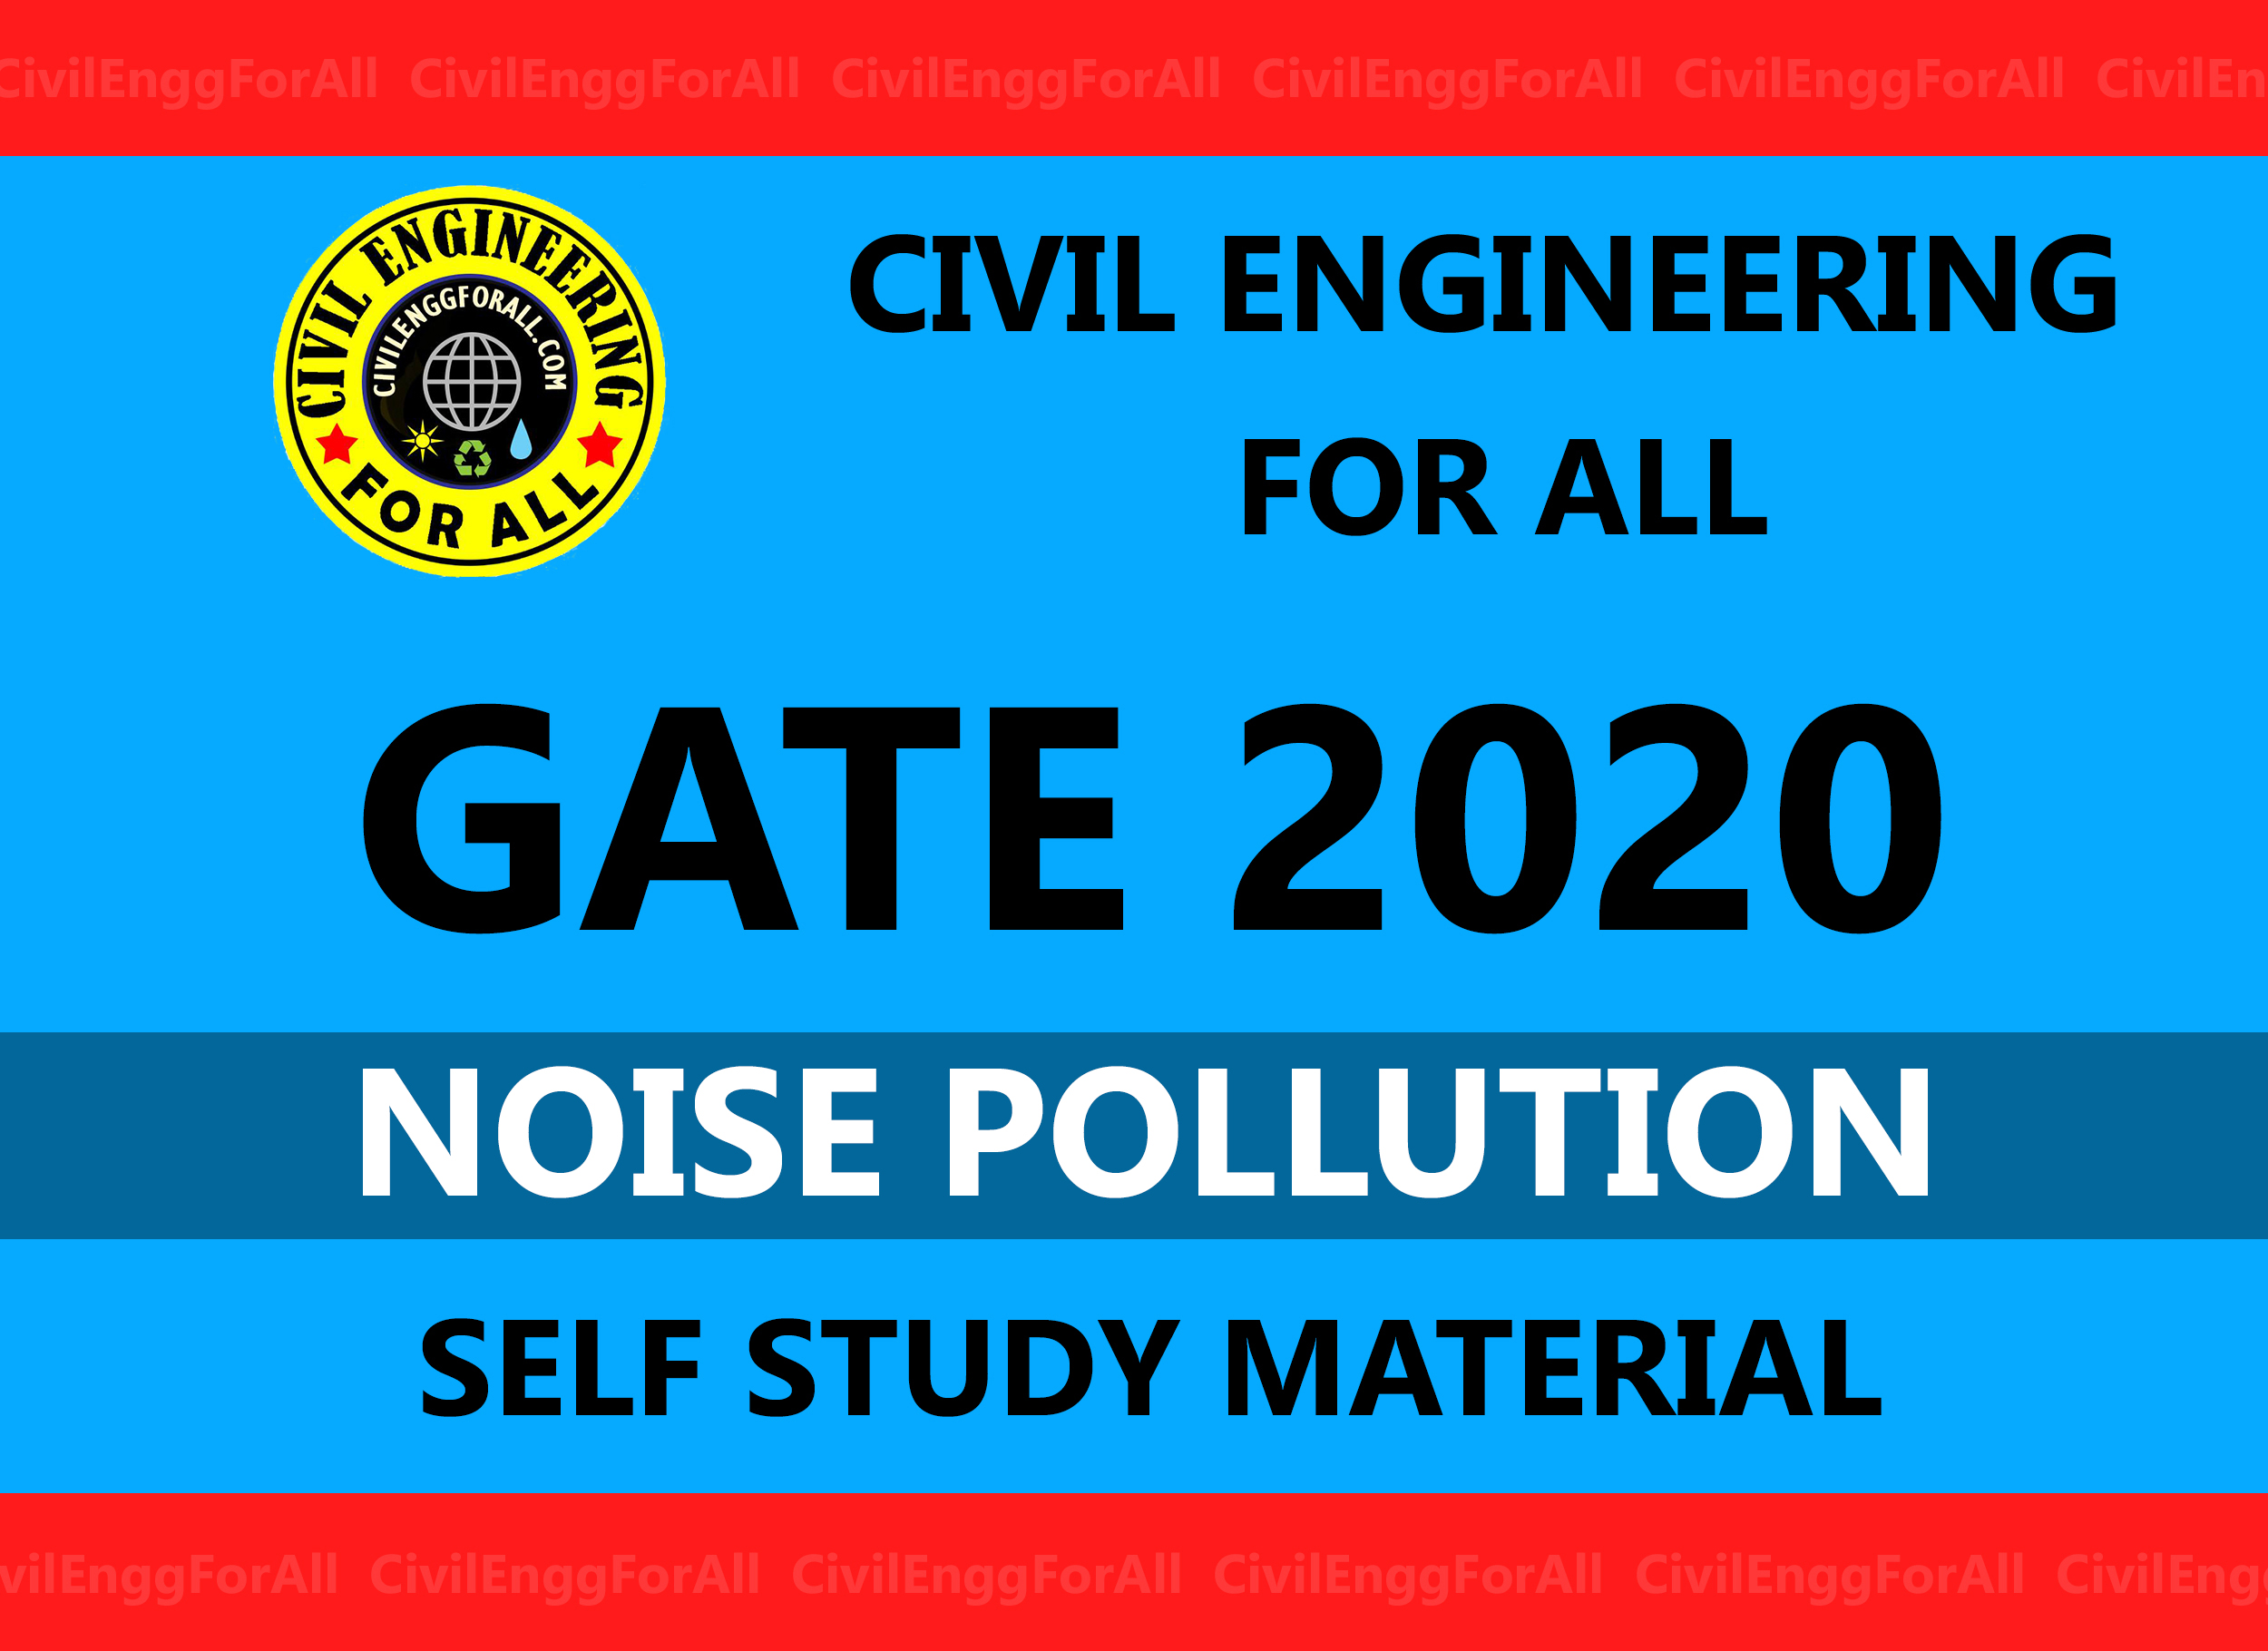 Noise Pollution Civil Engineering GATE 2020 Study Material Free Download PDF - CivilEnggForAll Exclusive